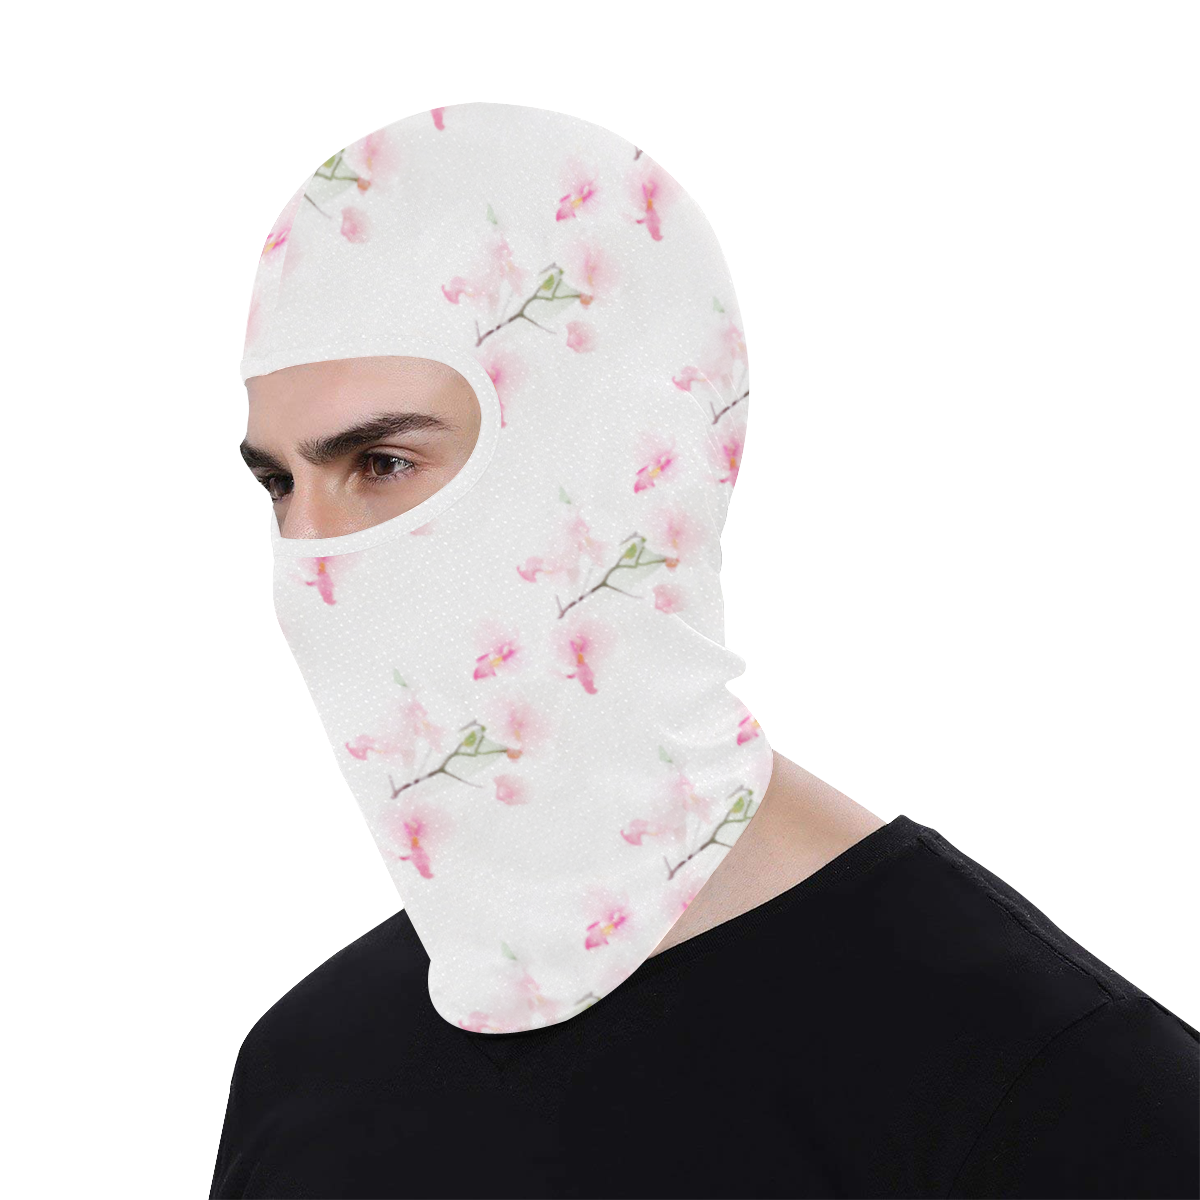 ORCHIDEE ROSE PATTERN All Over Print Balaclava